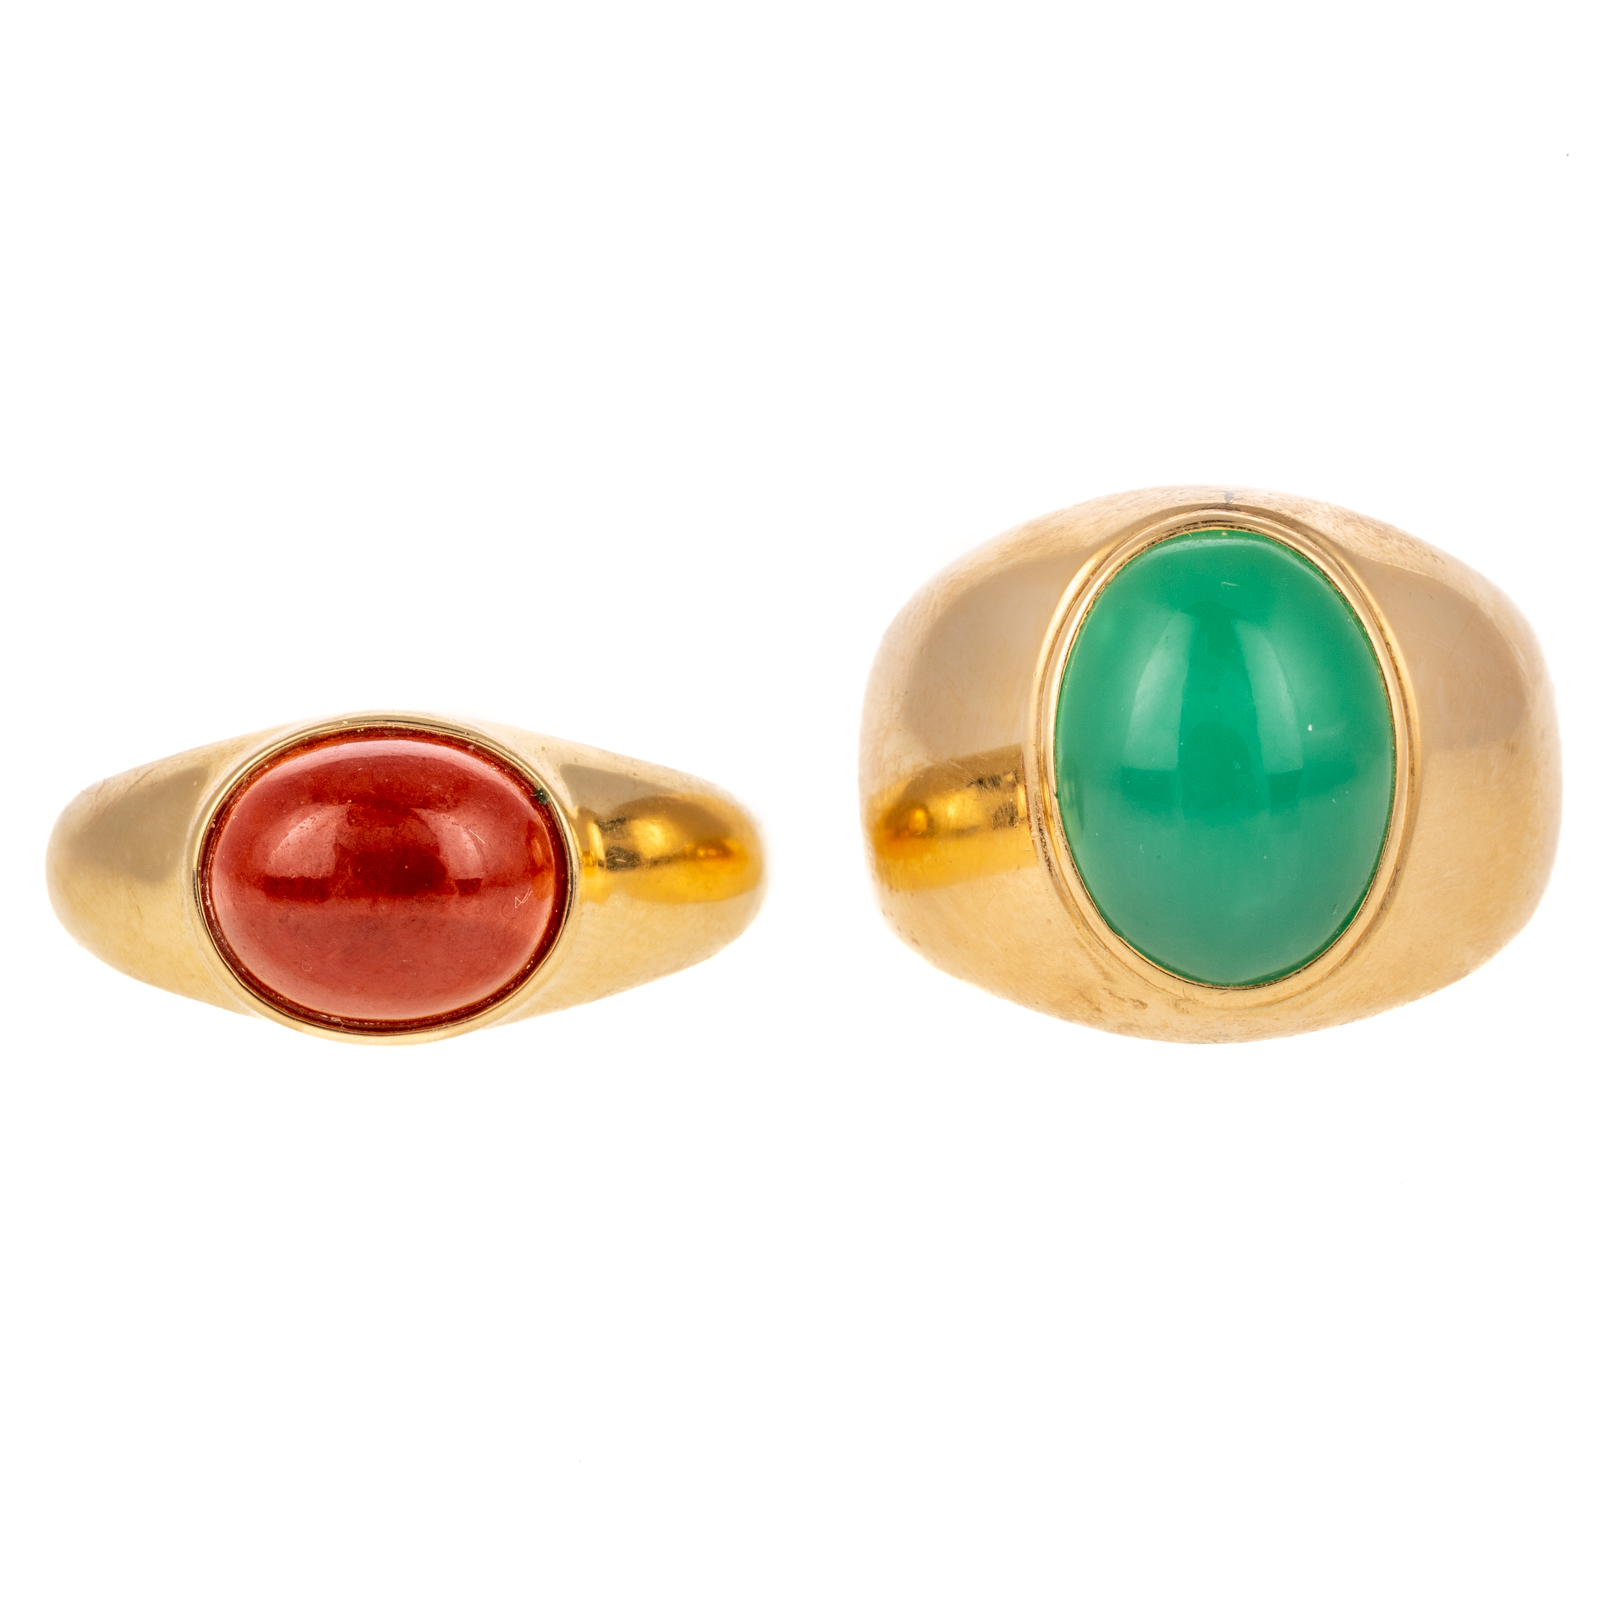 A PAIR OF GEMSTONE CABOCHON RINGS